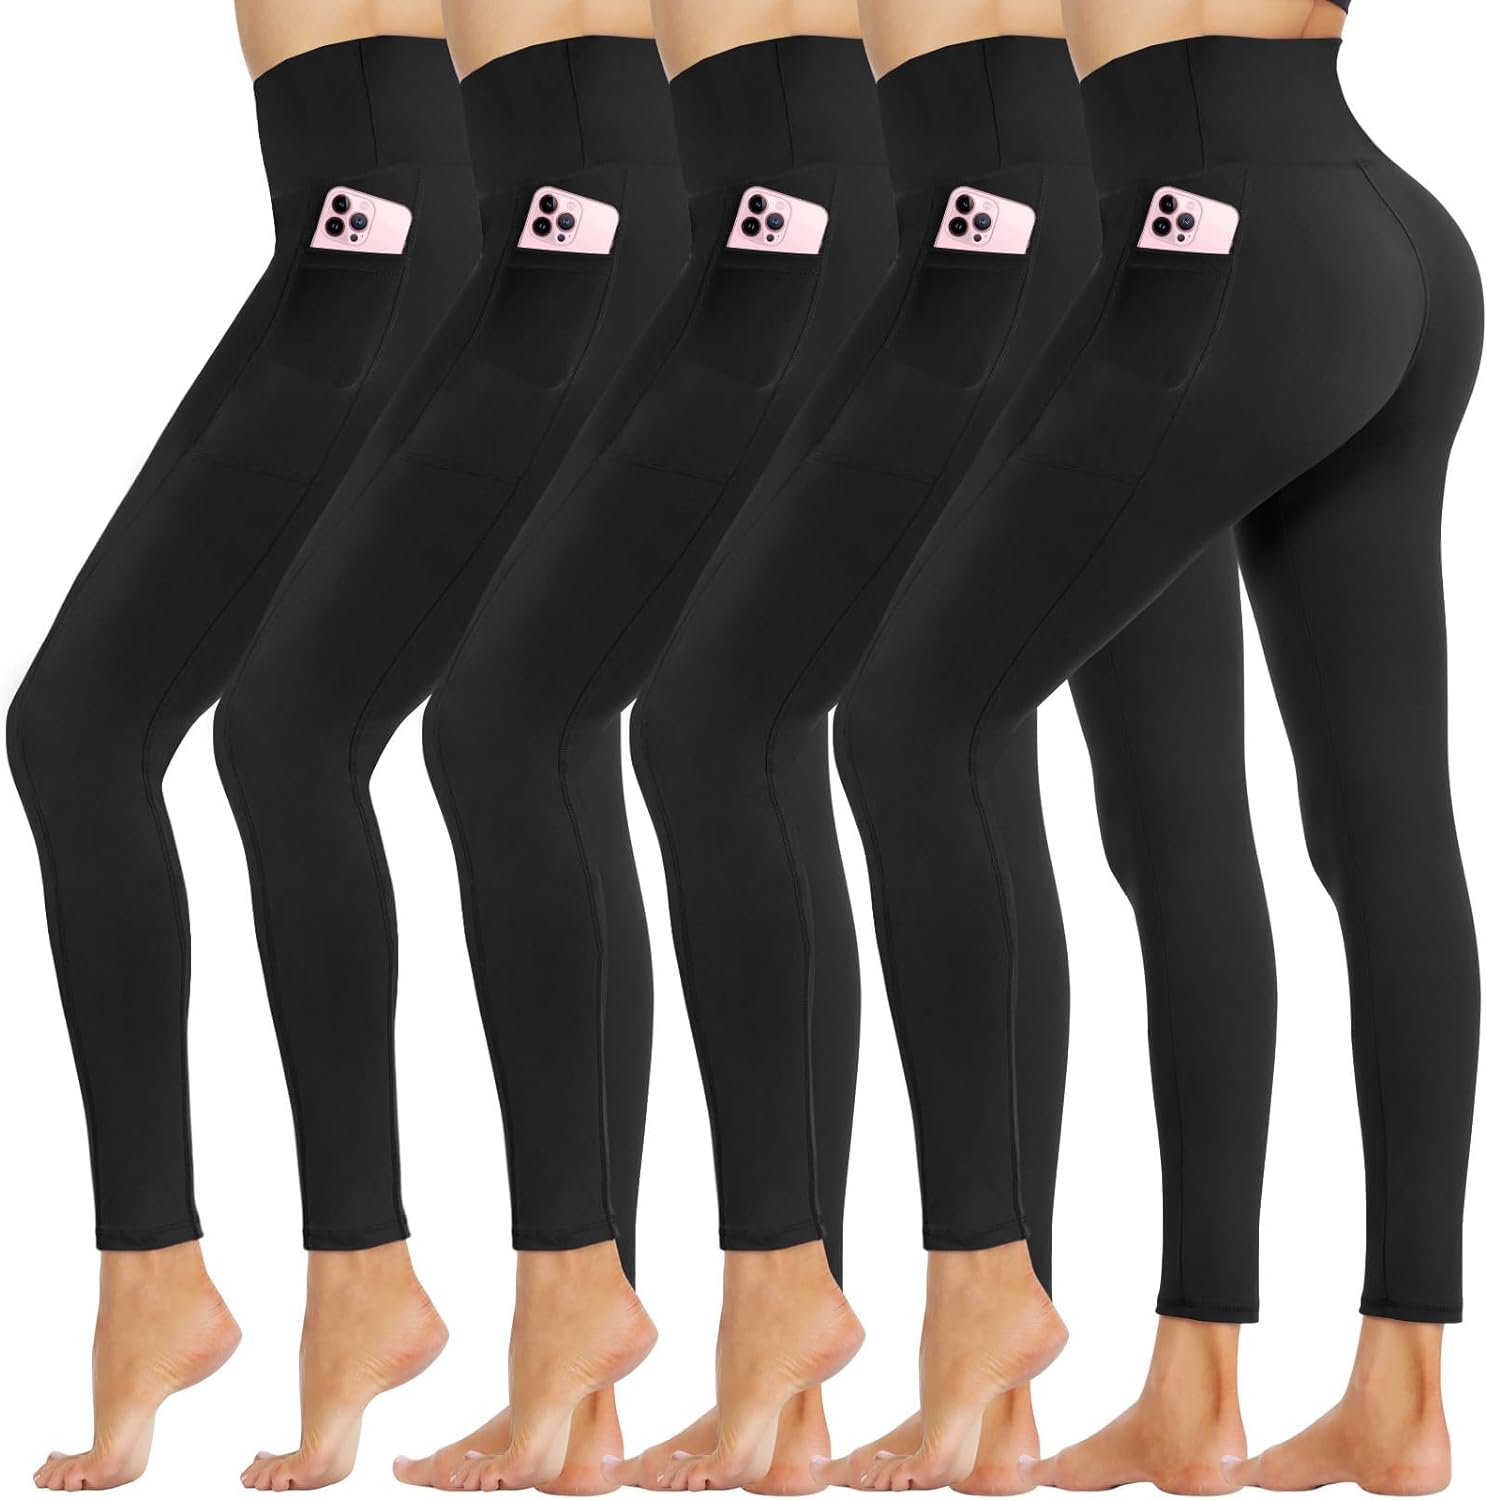 Opuntia 5 Pack Leggings for Women - High Waisted Tummy Control Soft Black Yoga Pants for Workout Athletic Gym Running